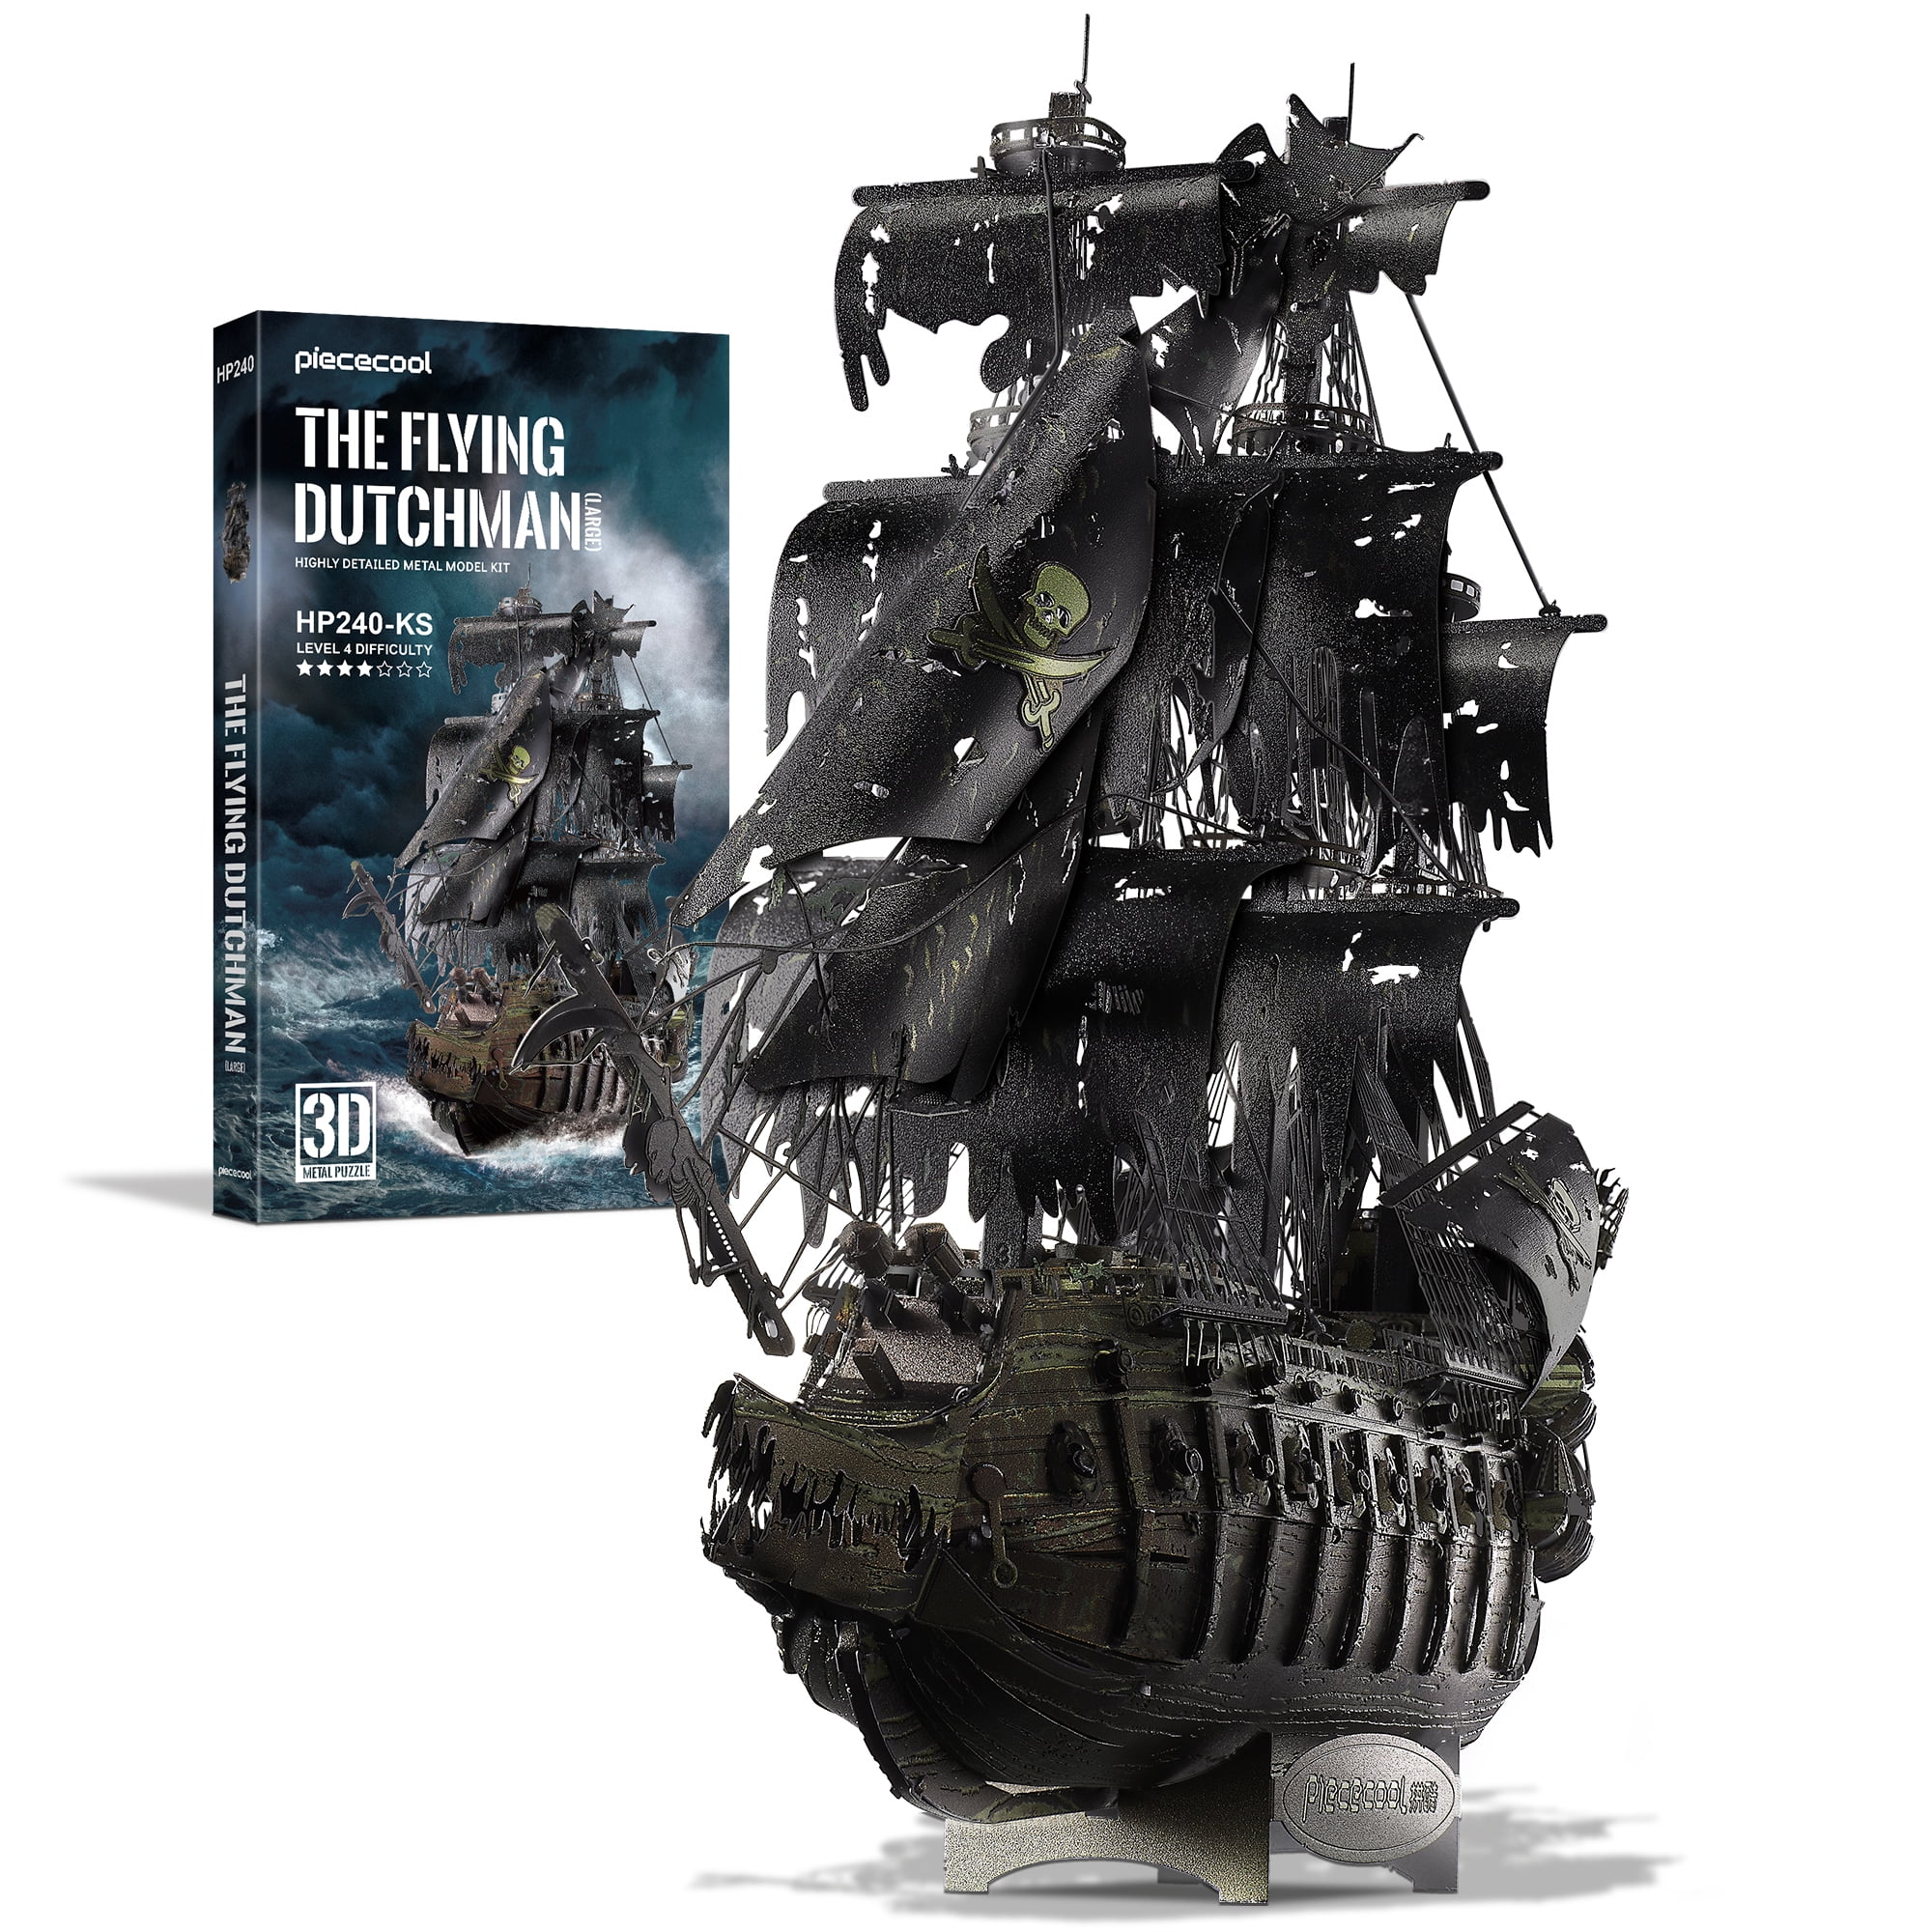 Piececool Metal 3D Puzzles for Adults Flying Dutchman Pirate Ship Model Building Set Gift for Kids Walmart.com